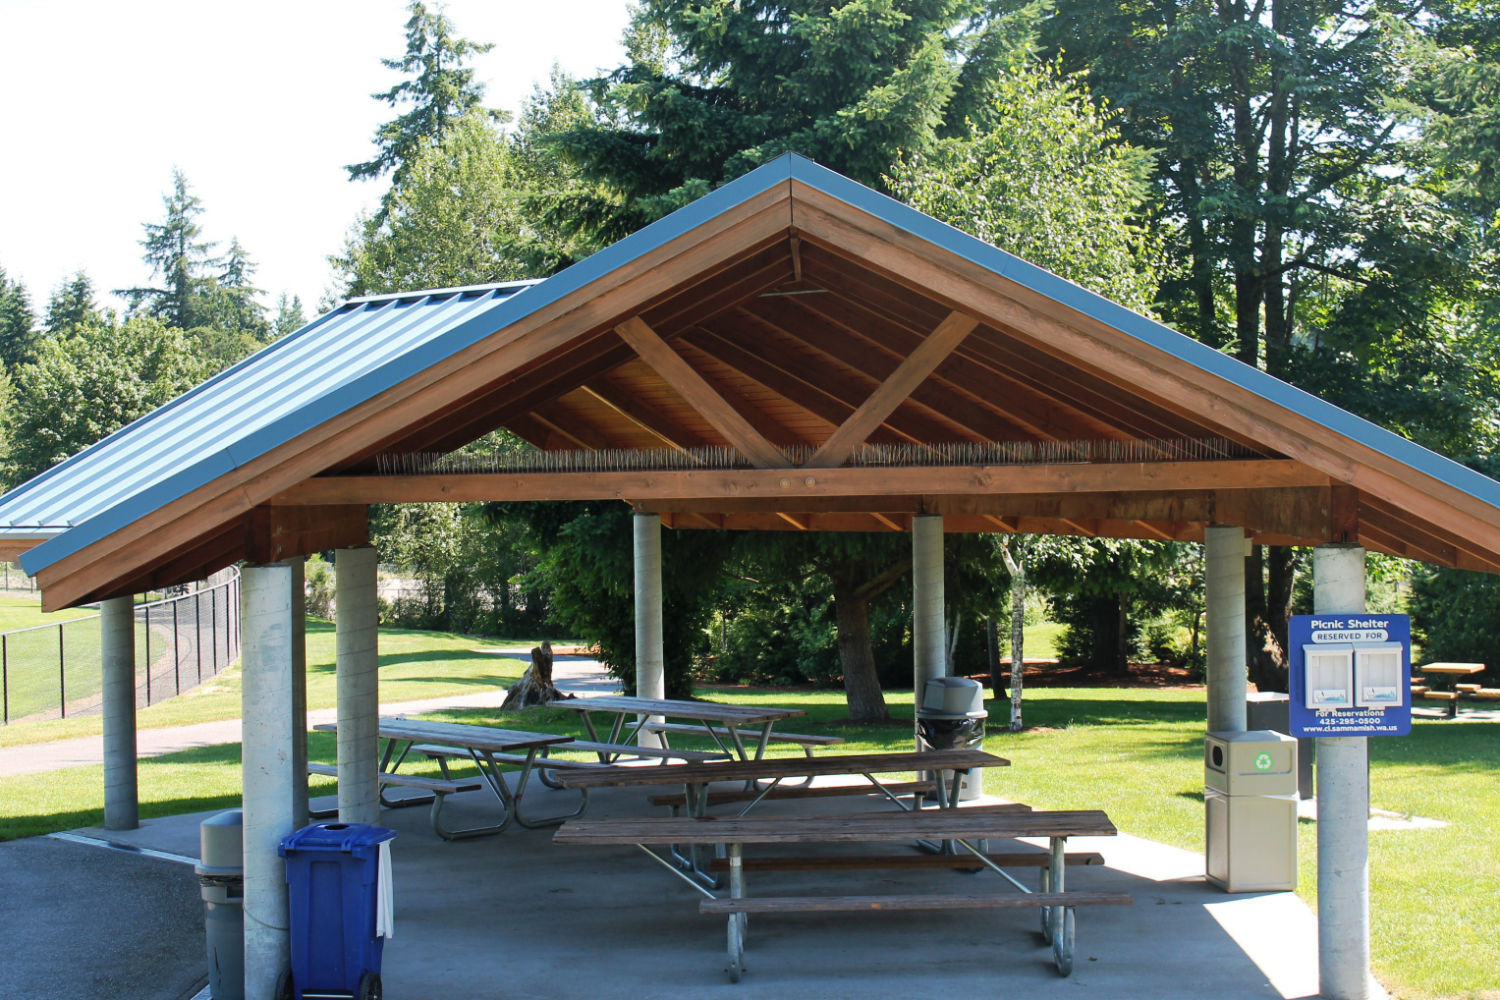 East Sammamish Park picnic shelter with blue metal roof and four picnic tables. There are four garbage/recycle bins. The shelter is surrounded by a grassy area, trees, and near a fenced field.